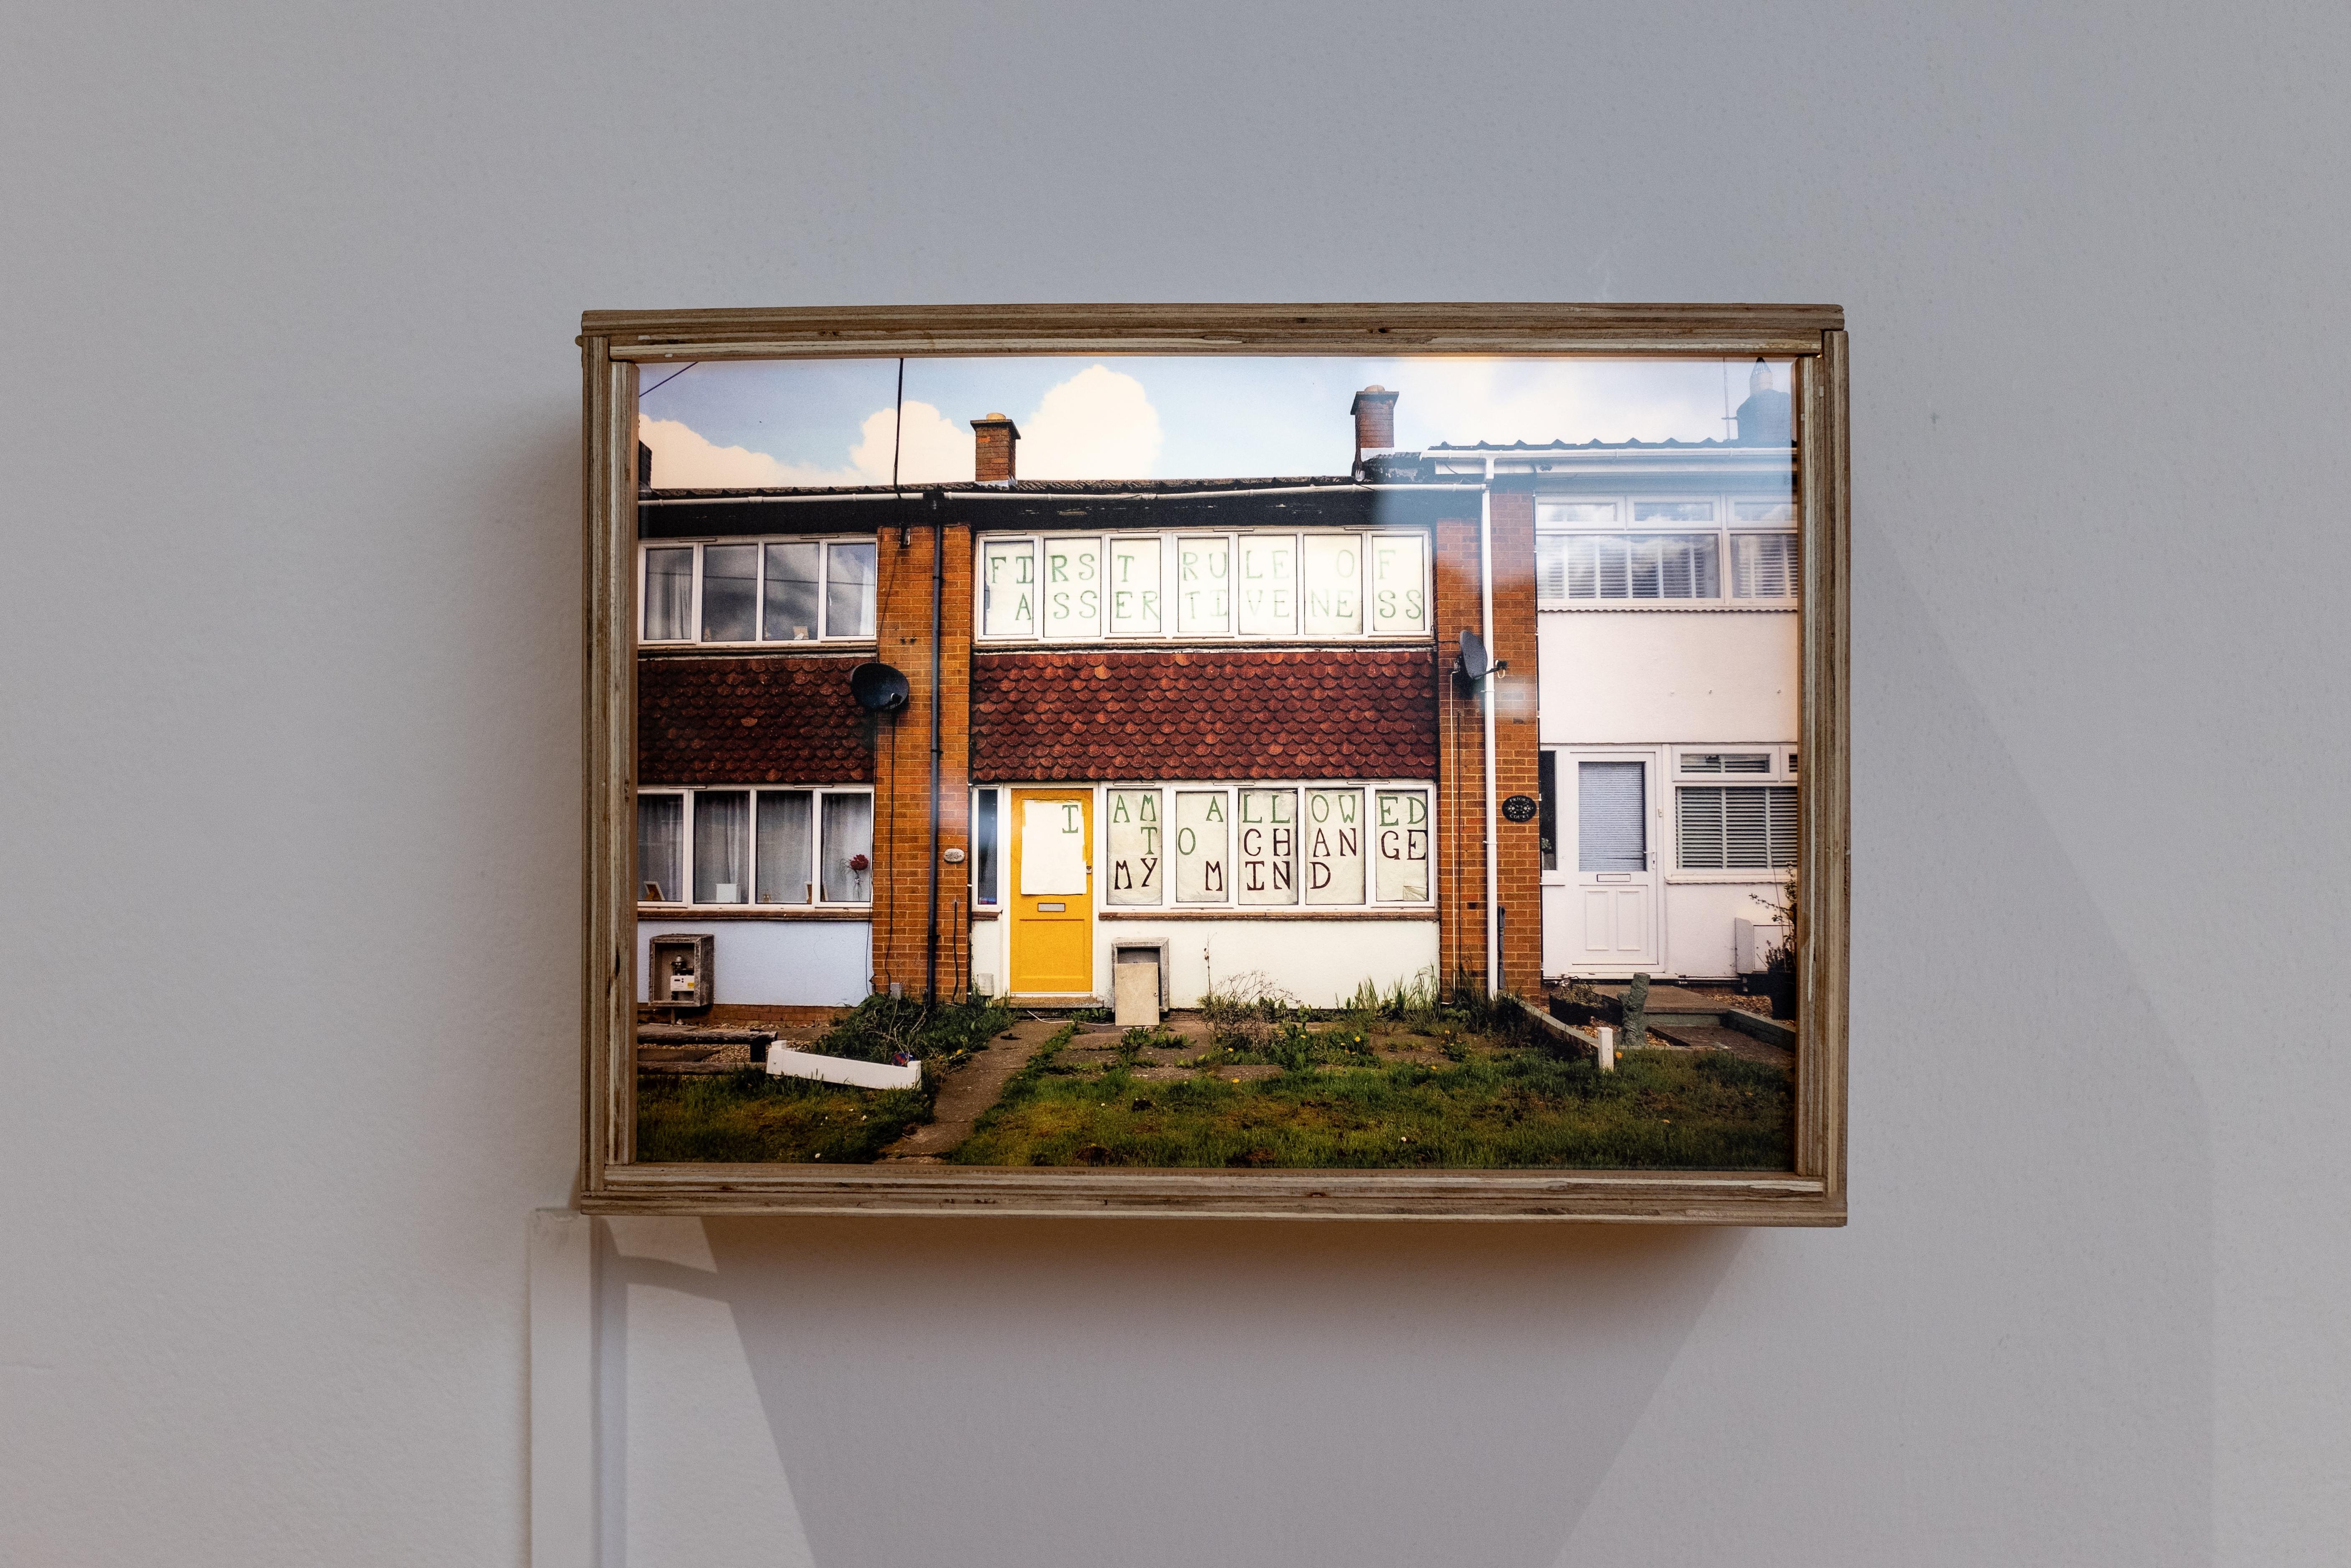 Work by FAHACS student George Storm Fletcher in Leeds Art Gallery. The work is an illuminated photographic print in a wooden frame lightbox and depicts a house with text art in the window.